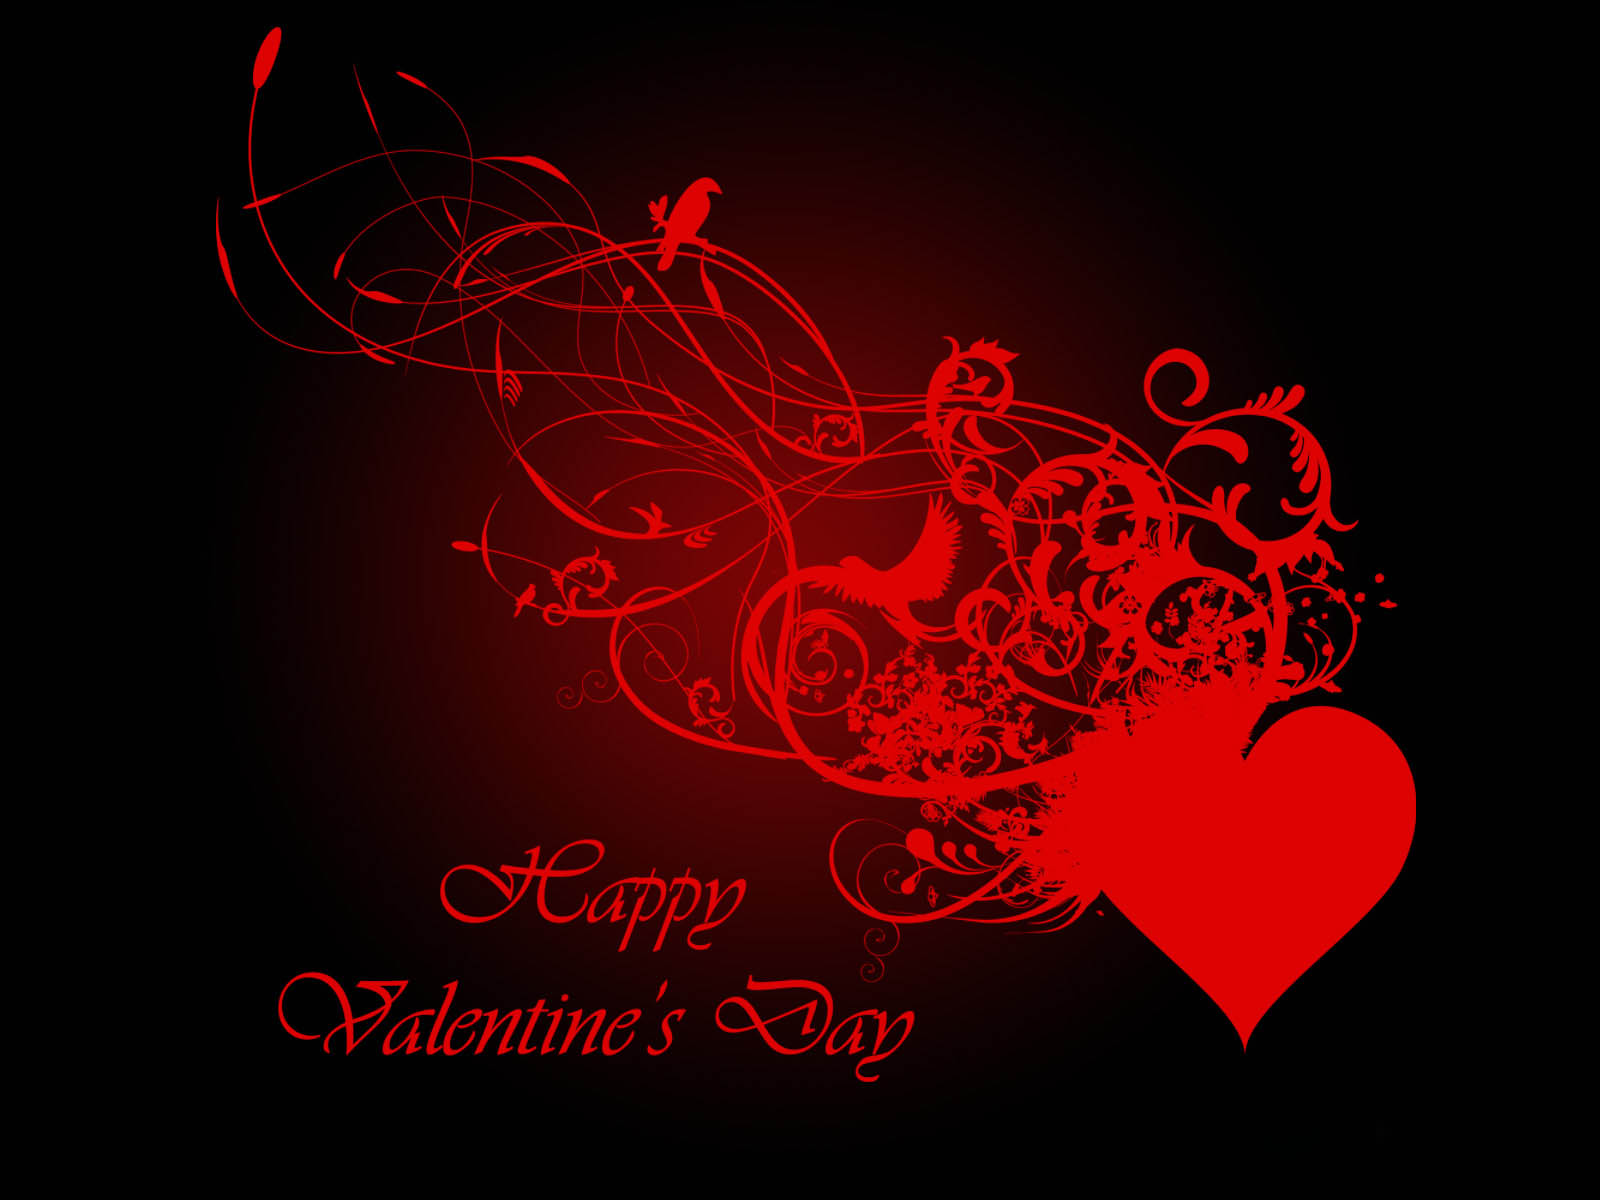 wallpapers: Valentines Day Wallpapers 20131600 x 1200